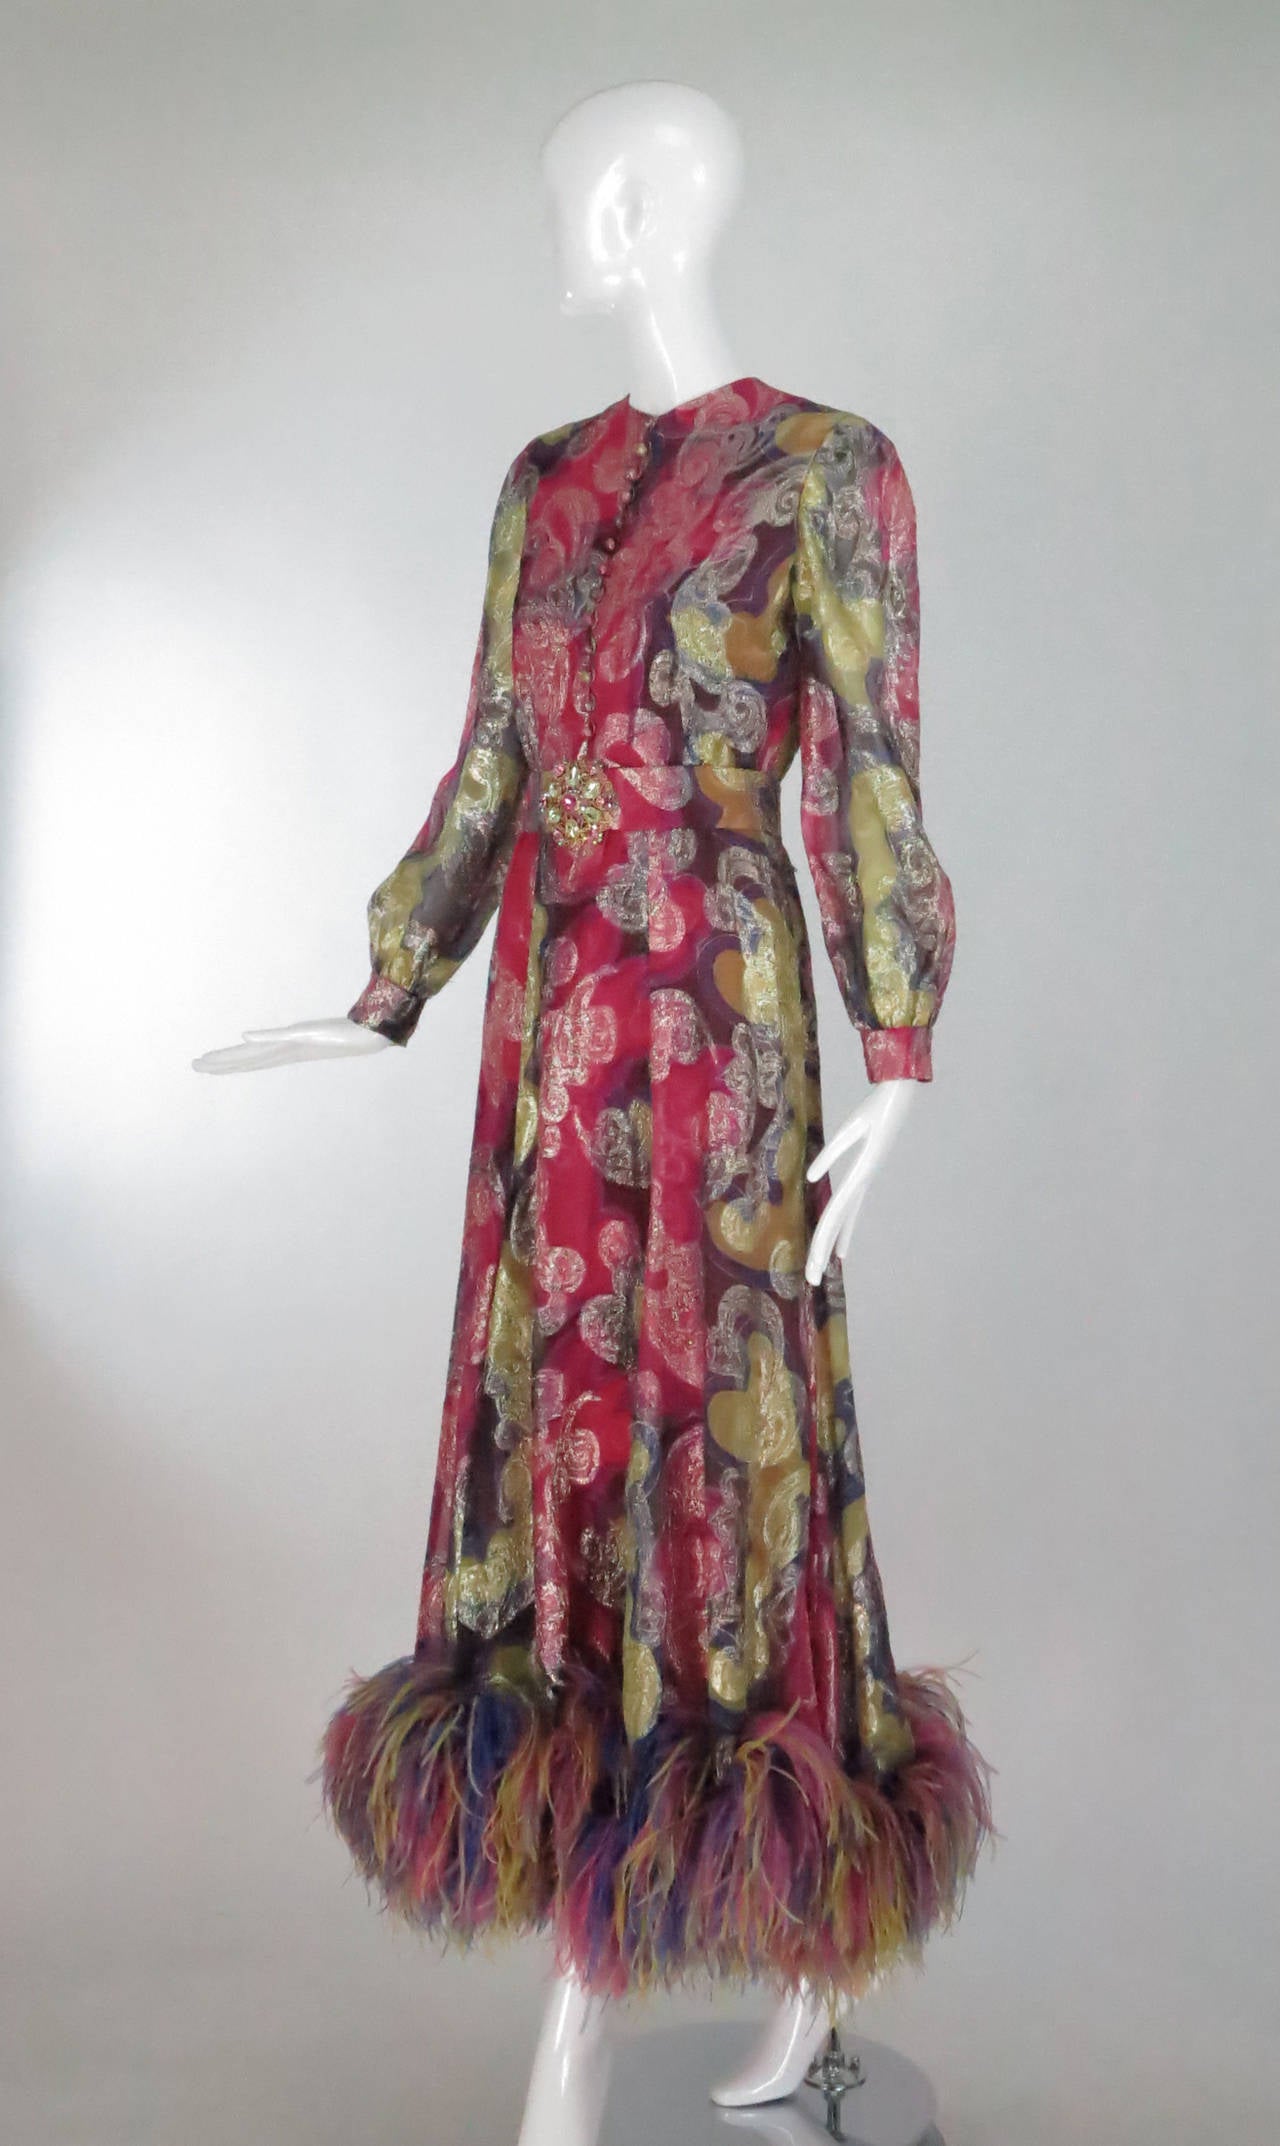 Fabulous metallic chiffon brocade gown from the early 1970s designed by Oscar de la Renta...Light as air fabric in shades of pink, purple, yellow & blue that sparkles with gold metallic threads, the hem has a deep band of ostrich feathers in the